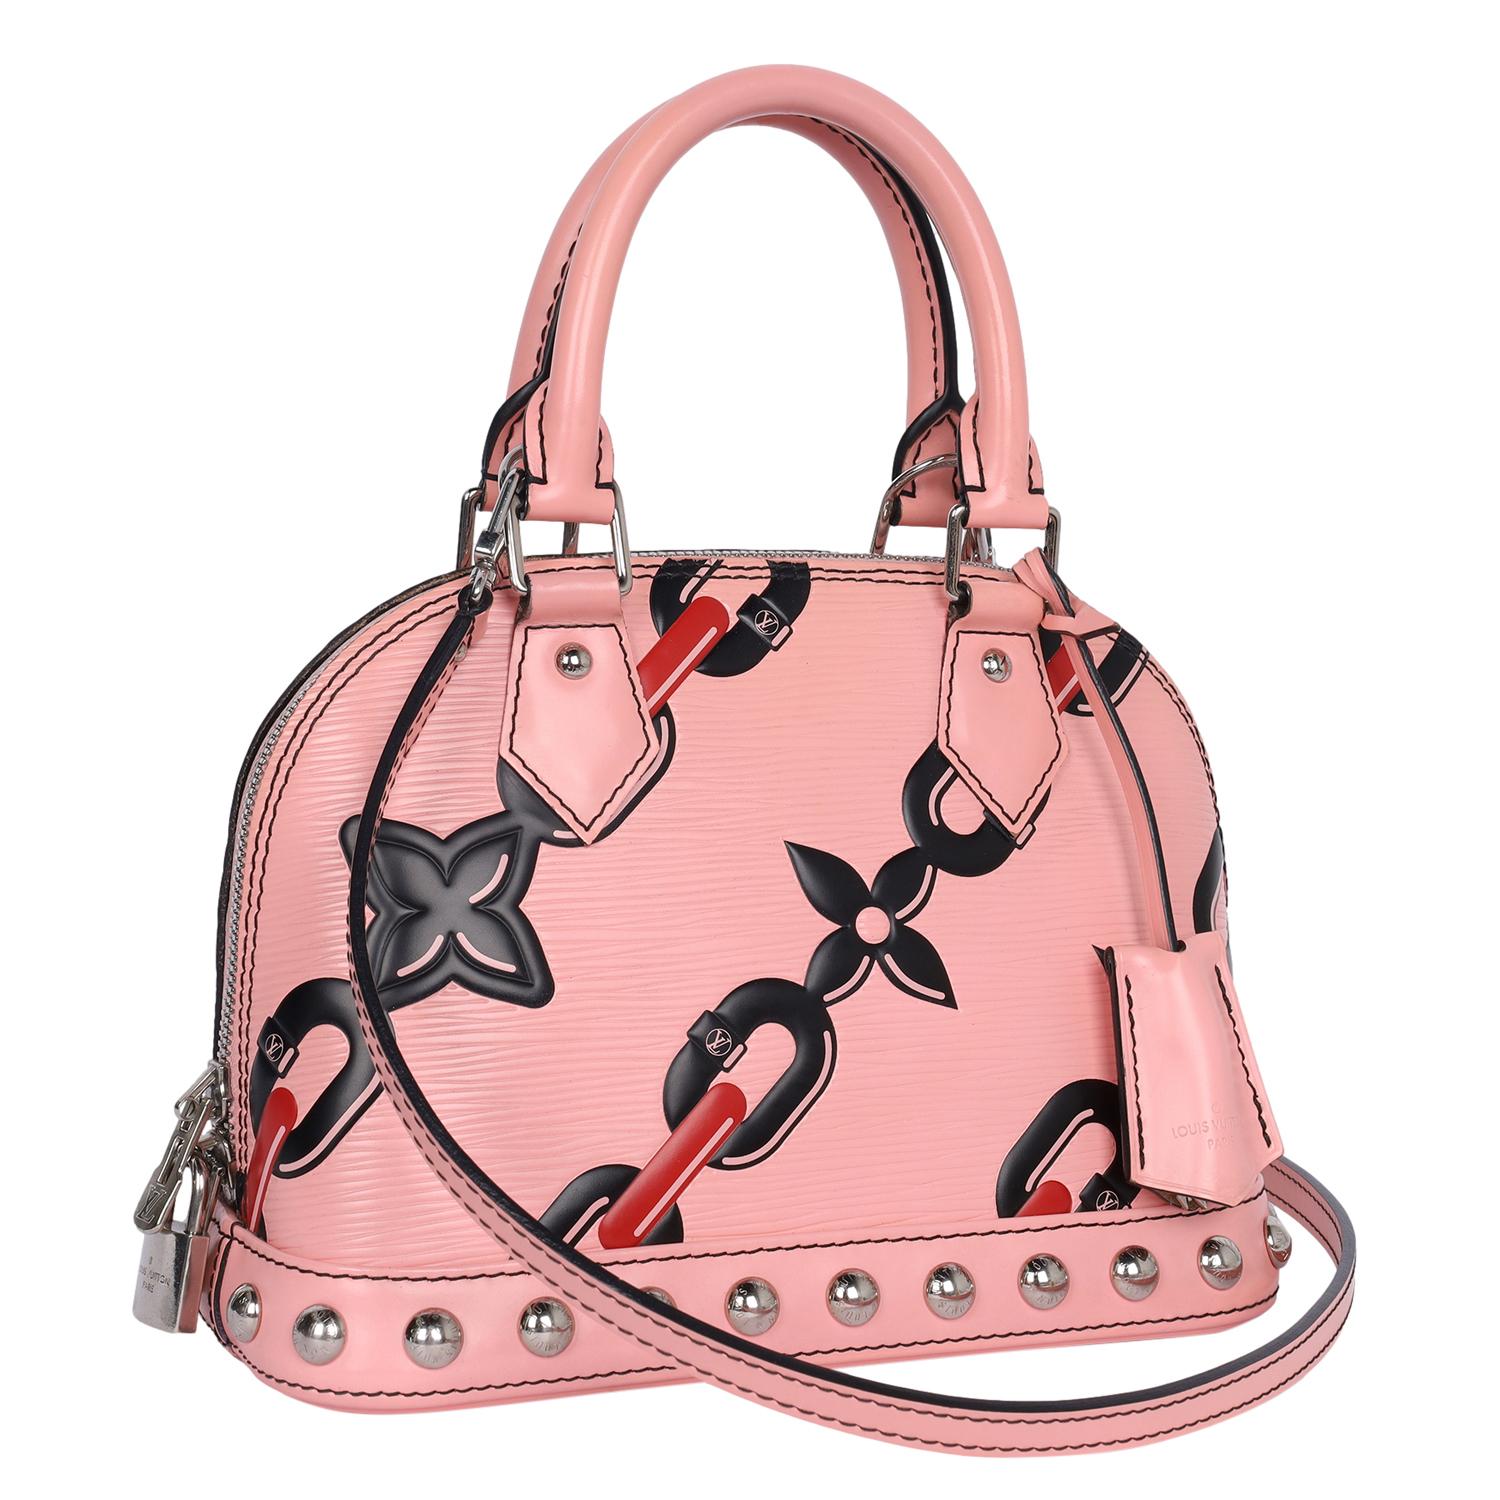 Authentic, pre-loved Alma BB 2Way handbag with Pink Epi leather and detail chain and flower design. Features pink Epi leather, double rolled top handles and a removable shoulder strap, 2 way zip closure, silver tone hardware, black alcantara